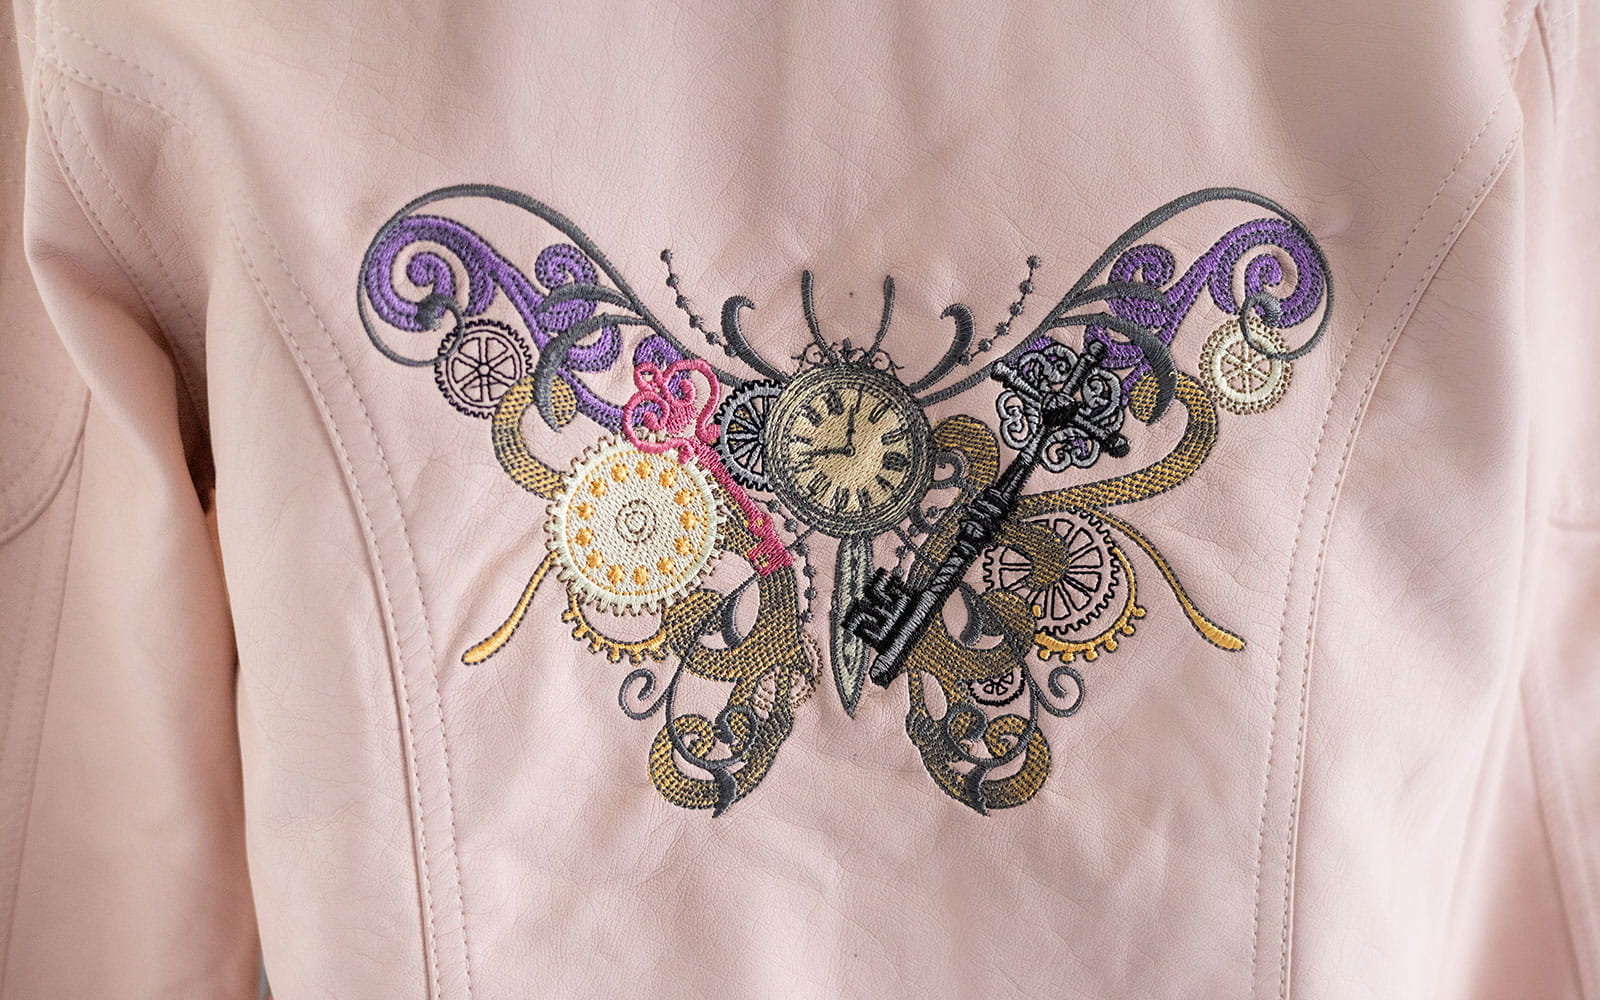 large embroidered steampunk butterfly made of cogs, gears and clocks